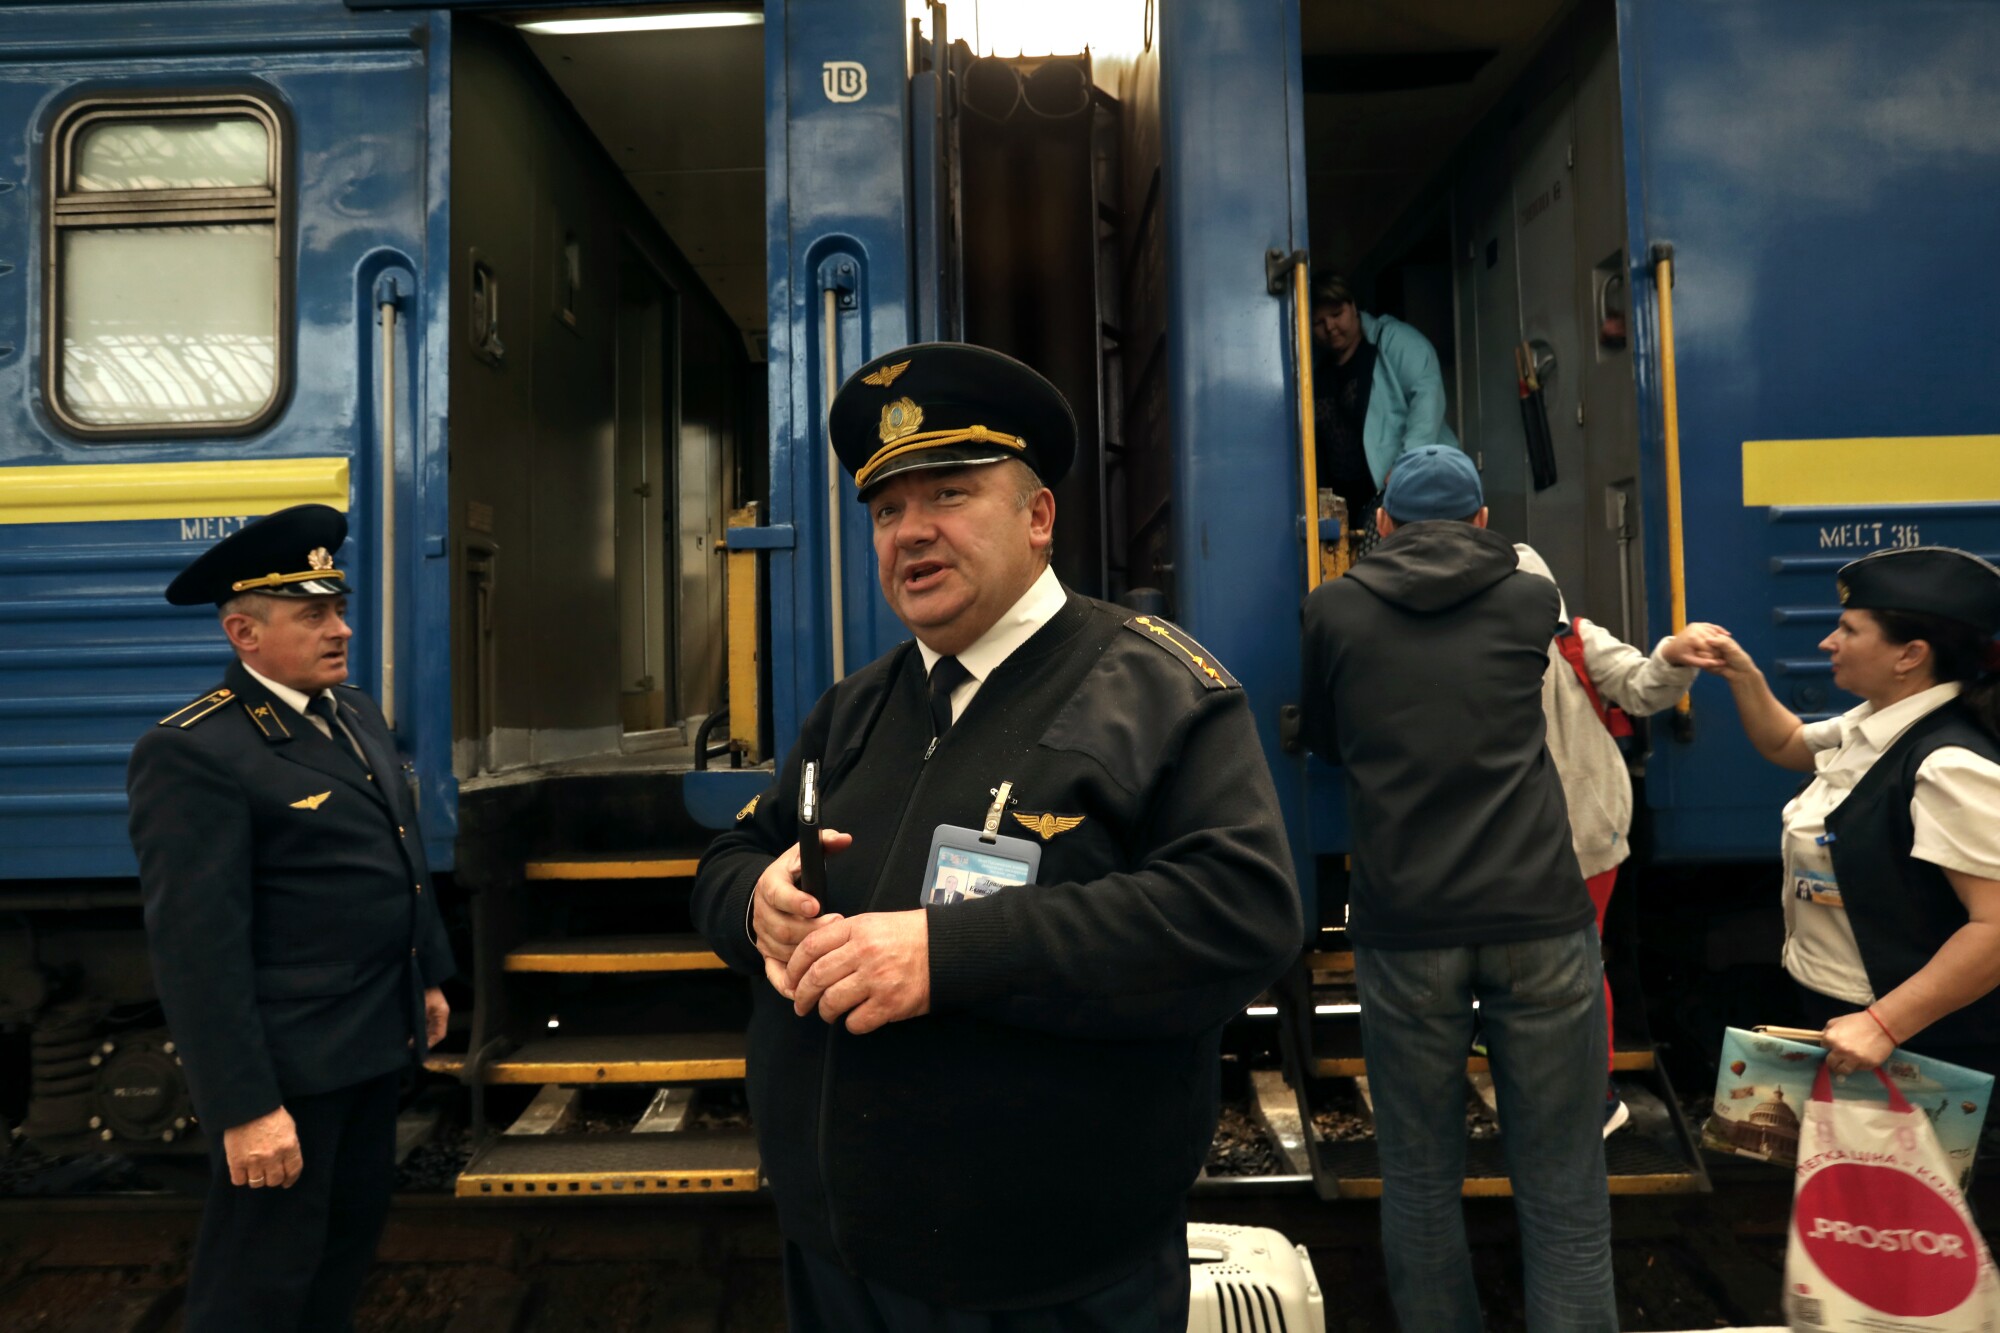 Two men in uniforms and hats line a set of steps on a blue wagon